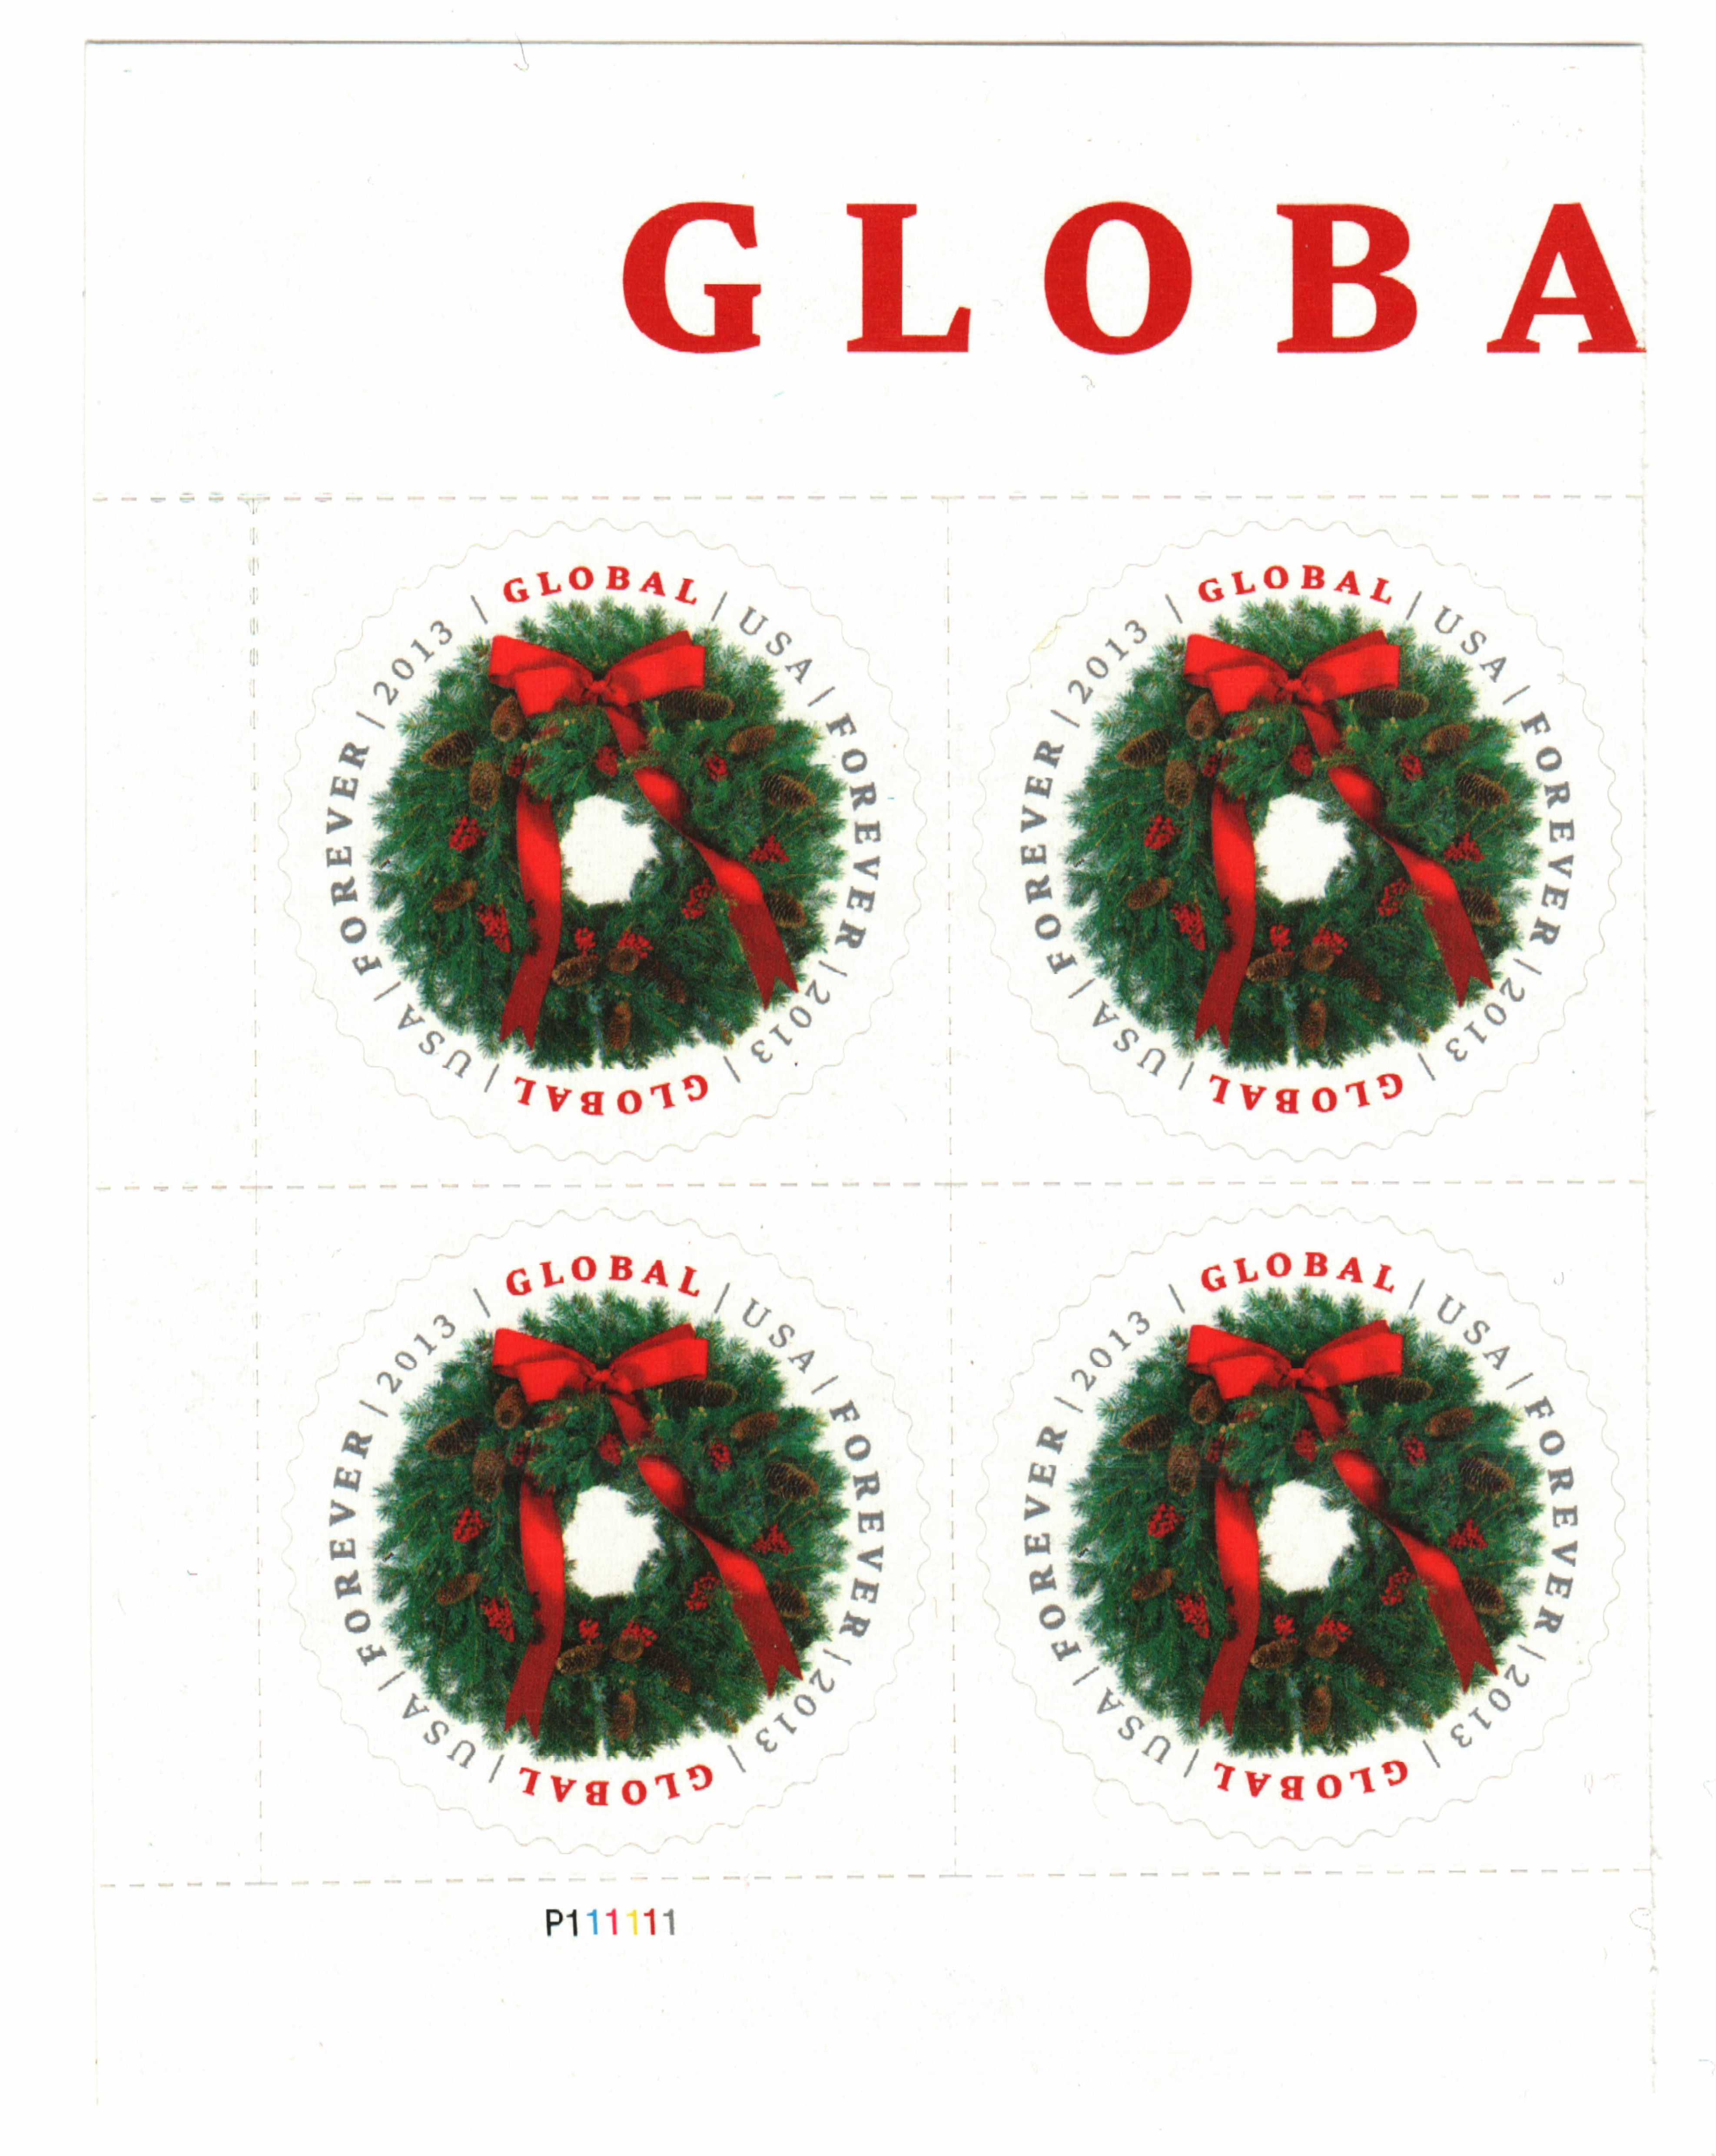 Holiday Wreaths Book of 20 Forever Stamps Christmas Tradition Celebration  Scott Holiday Wreaths Book of 20 Forever Postage Stamps Christmas Tradition